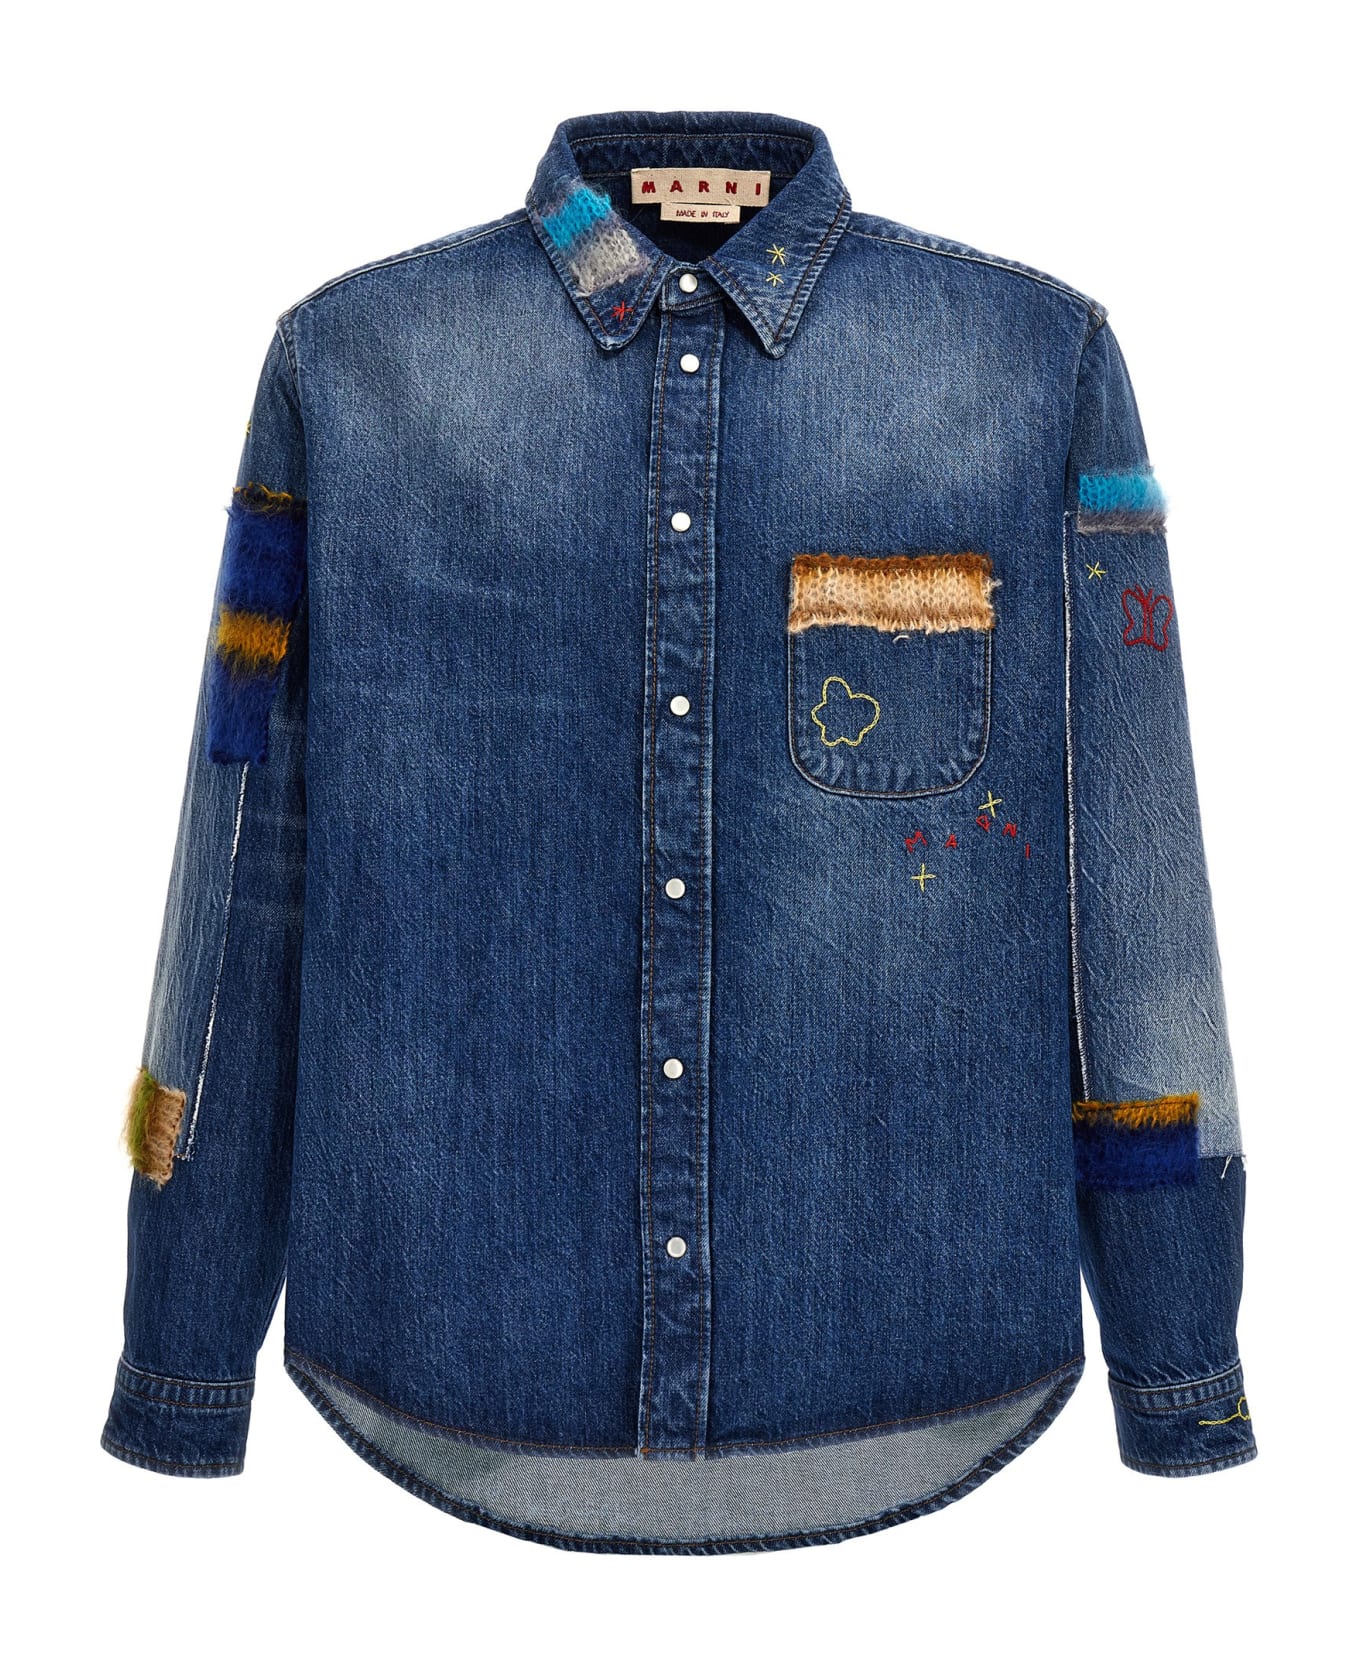 Marni Denim Shirt, Embroidery And Patches - Blue